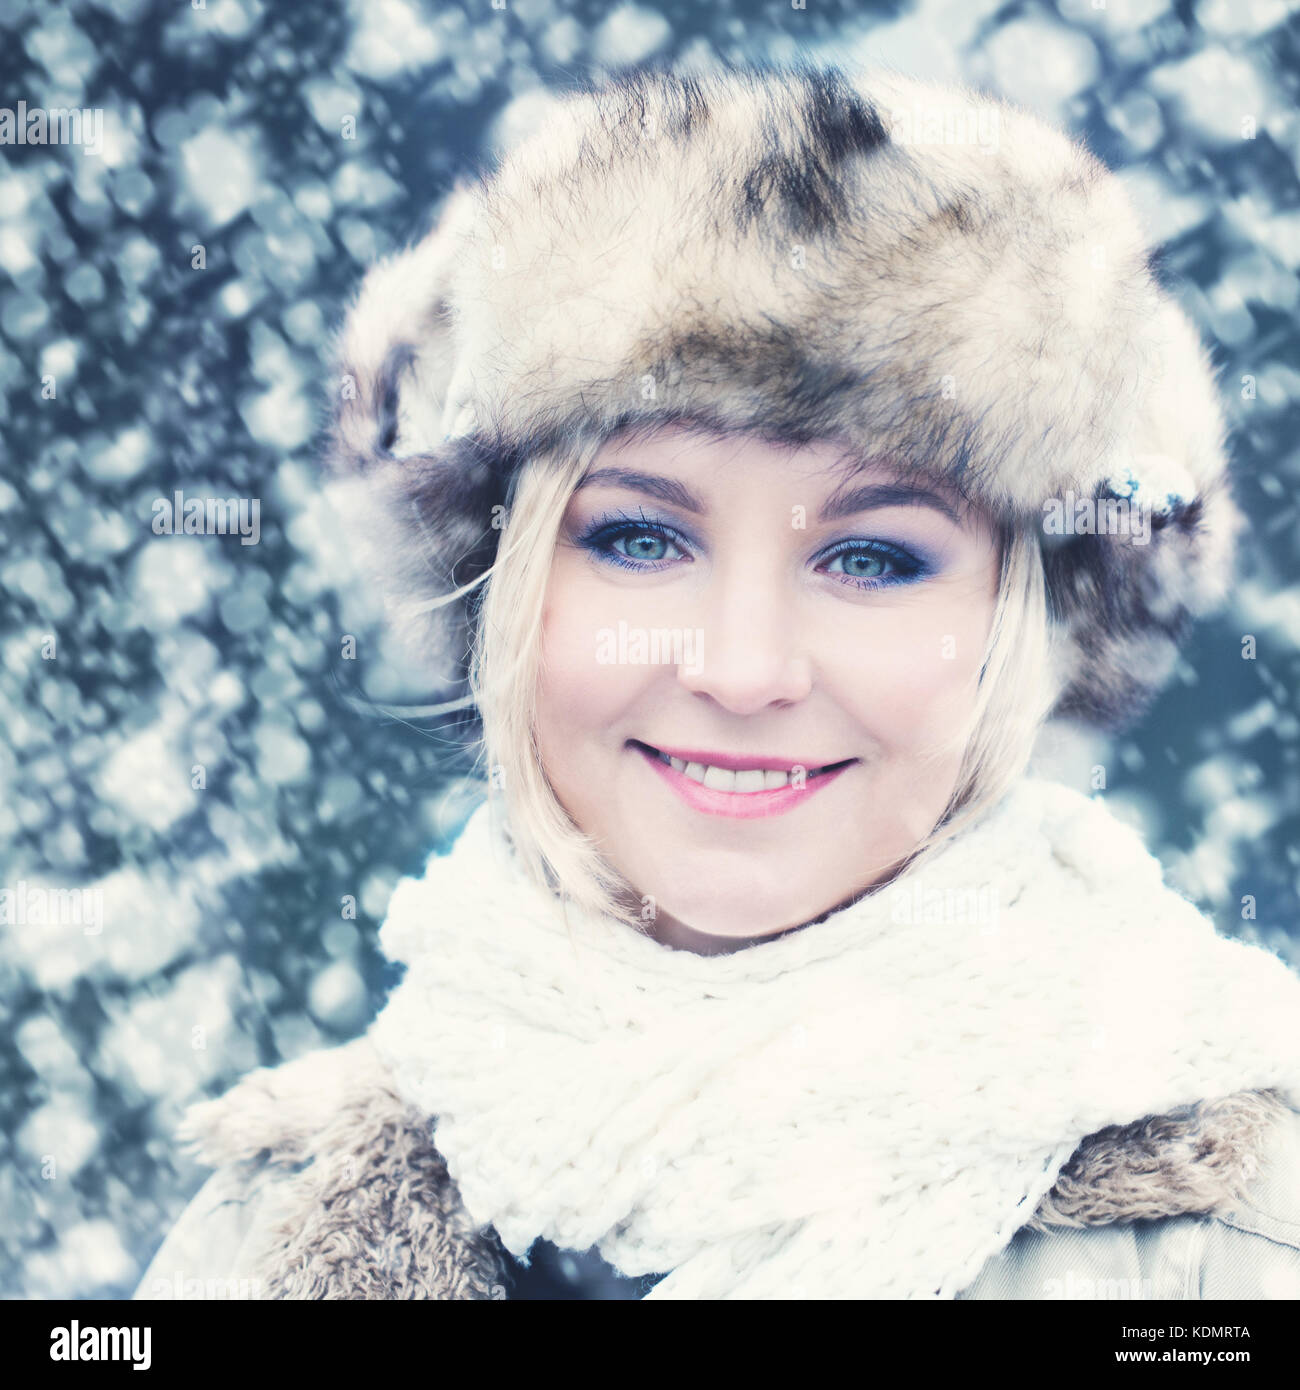 Winter Portrait of Smiling Woman Stock Photo